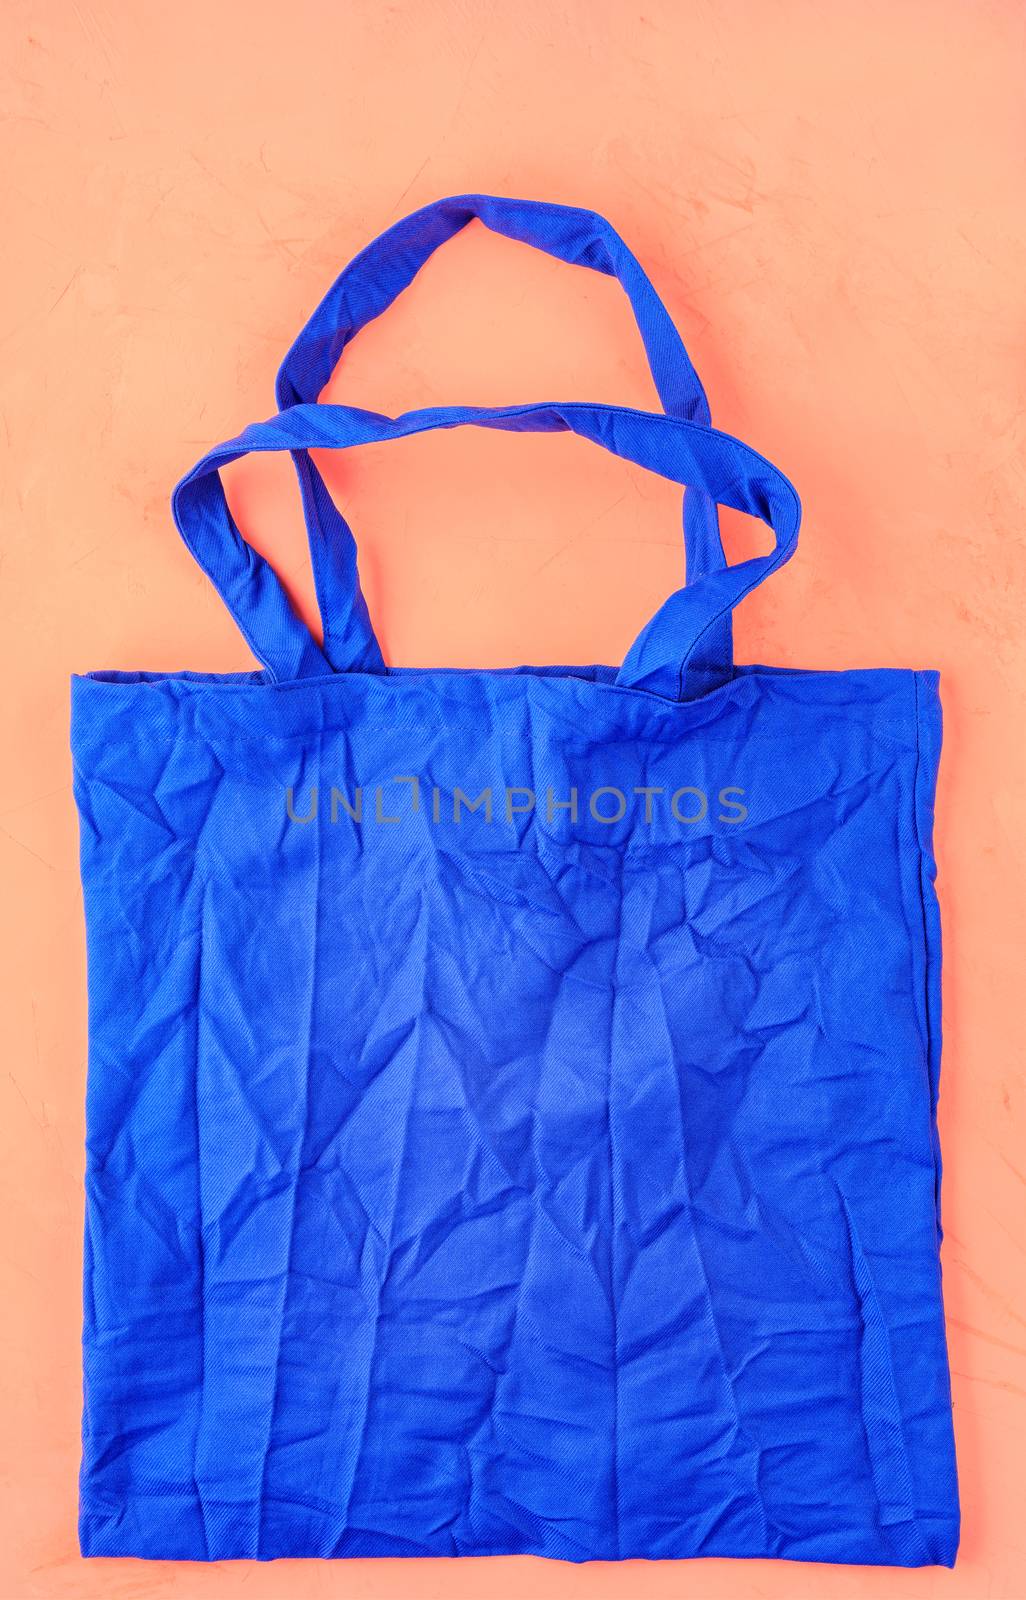 Eco-friendly cotton bag in classic blue color against a peach color background. by Sergii